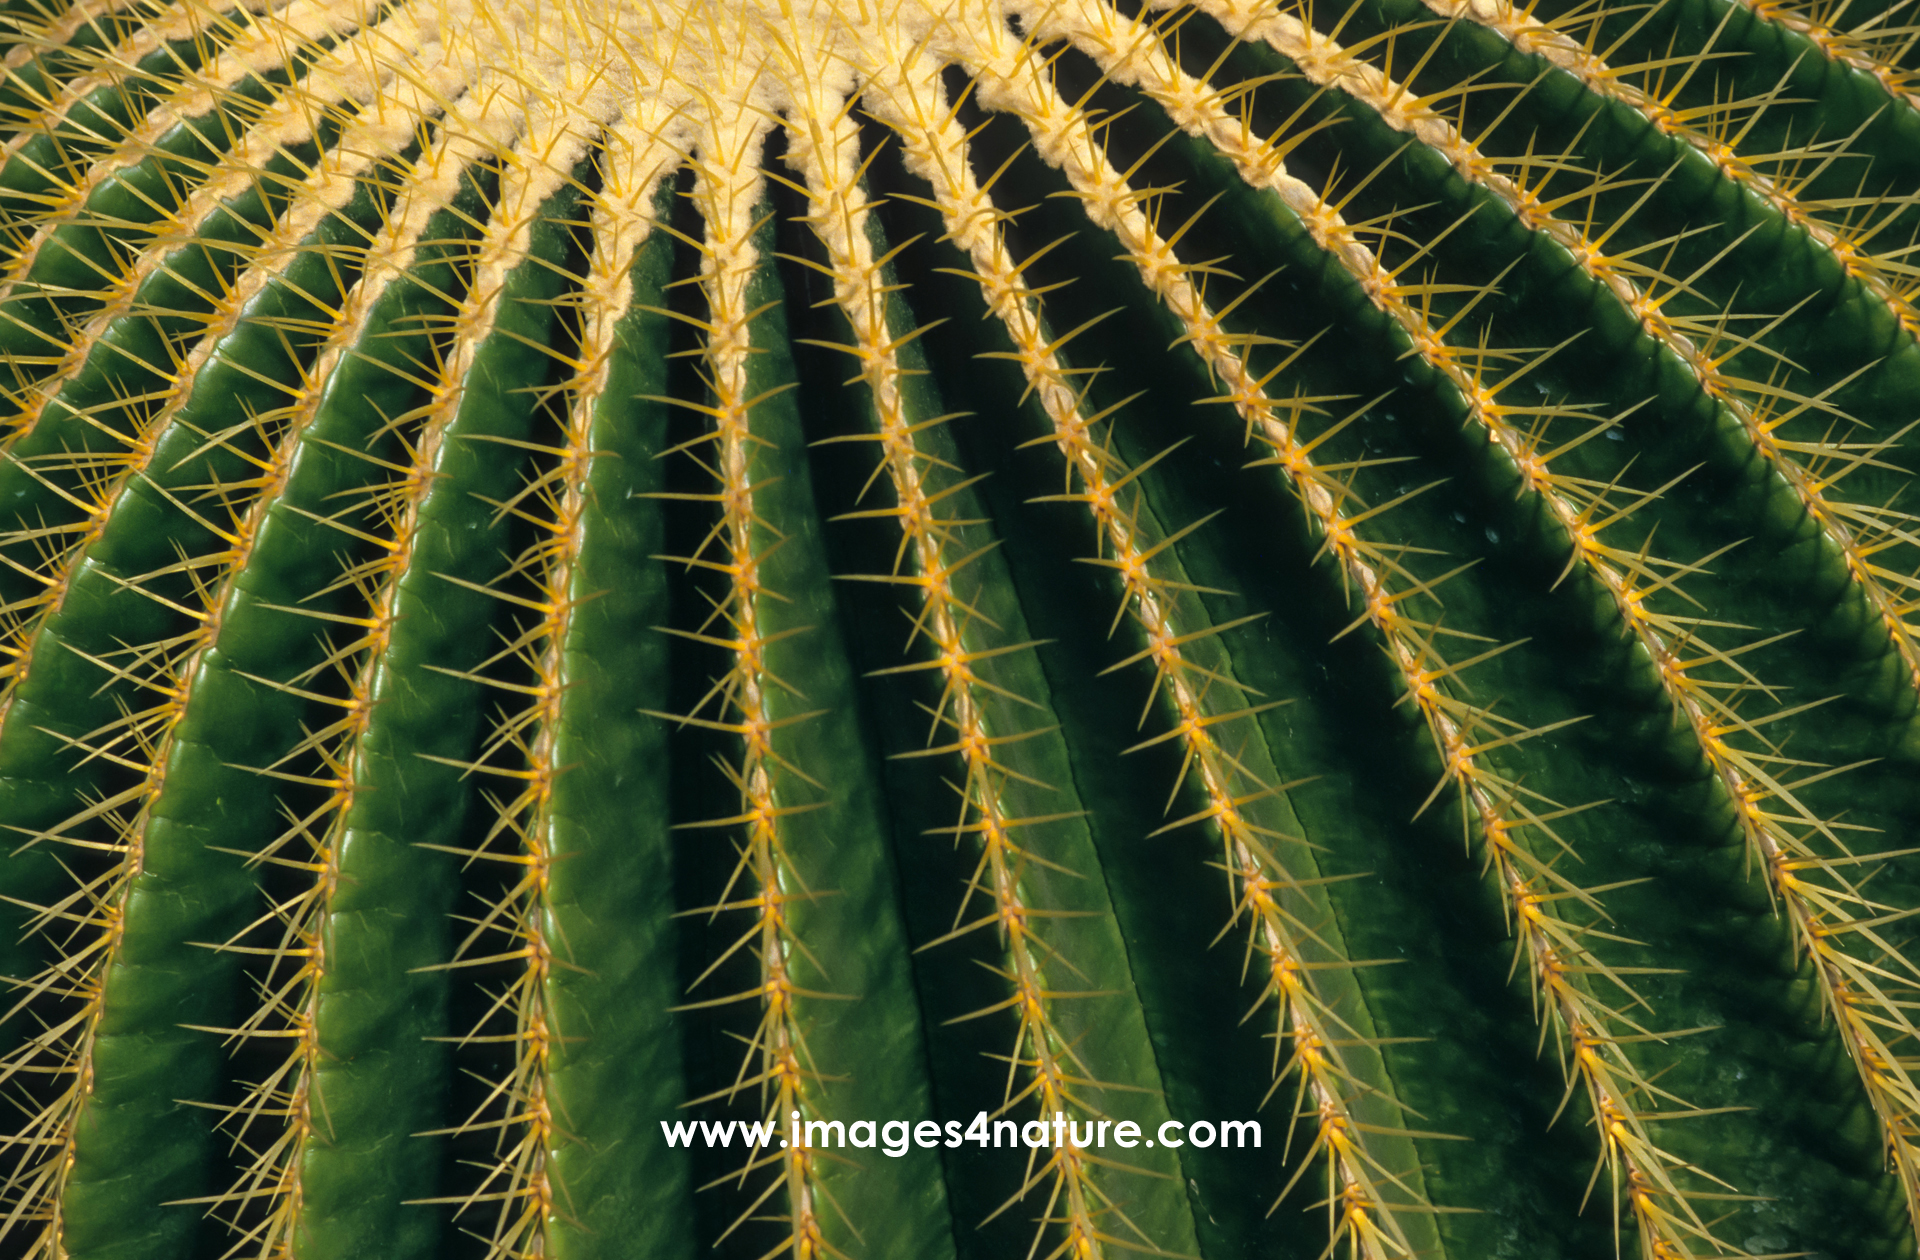 Partial close view of green barrel cactus with lots of yellow spines